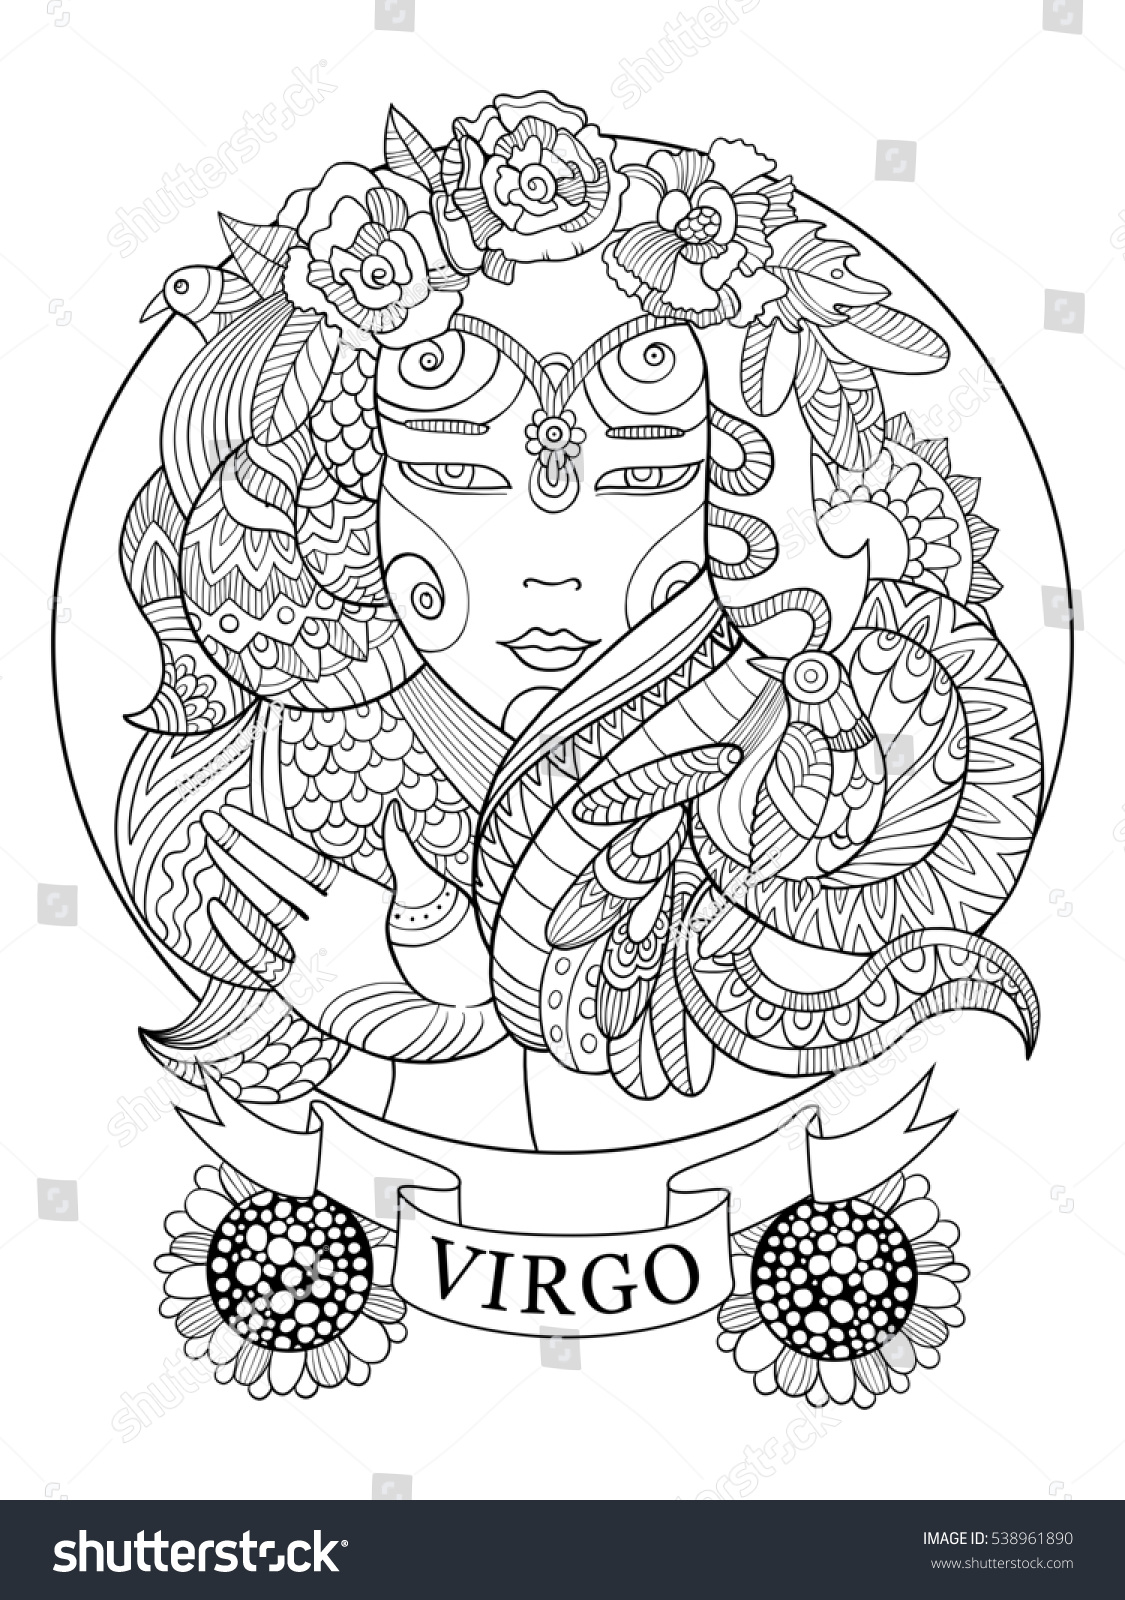 Download Virgo Zodiac Sign Coloring Book Adults Stock Illustration 538961890 - Shutterstock